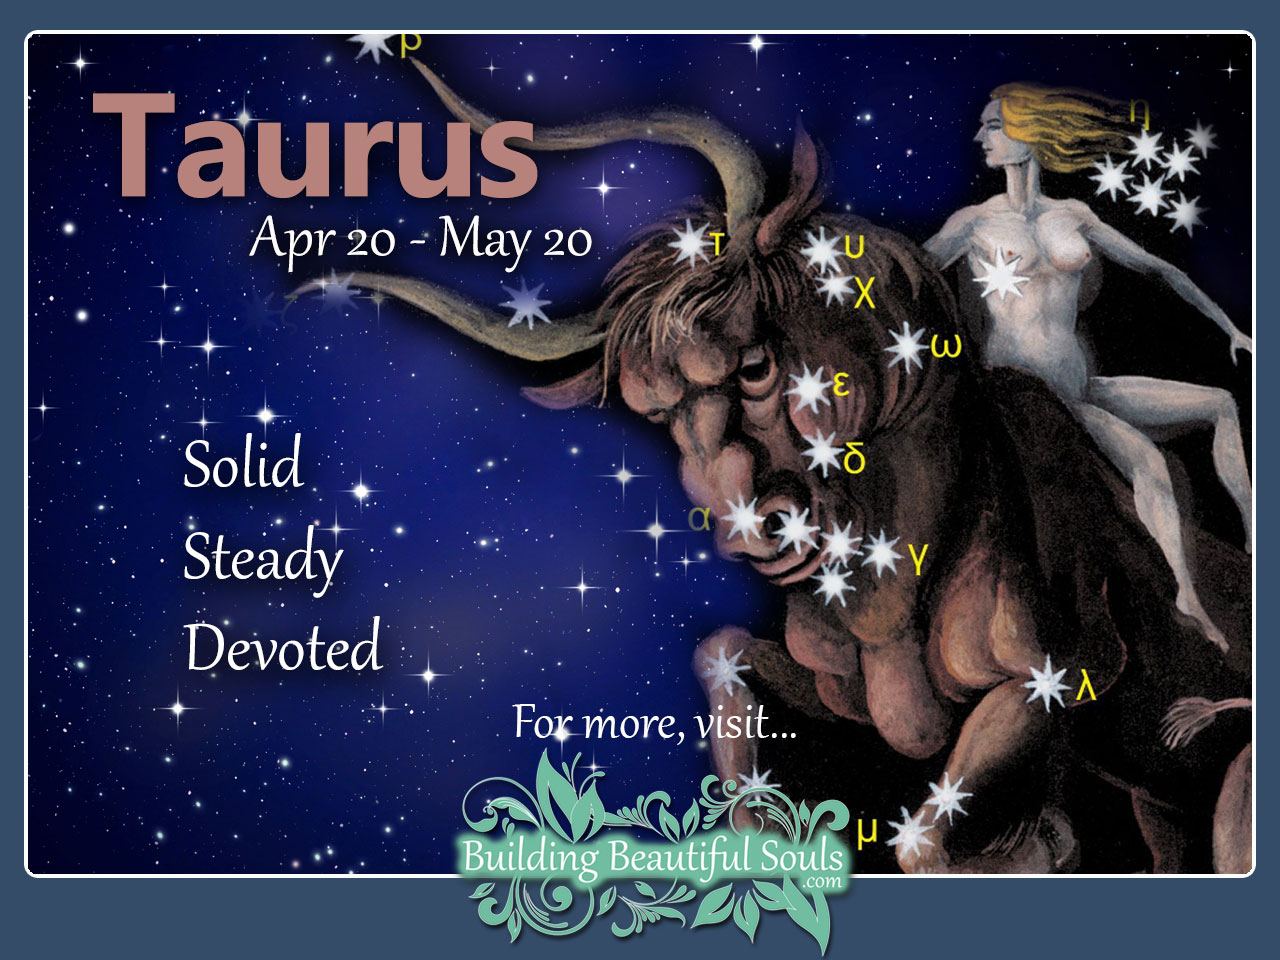 Male bed taurus traits in Taurus sign